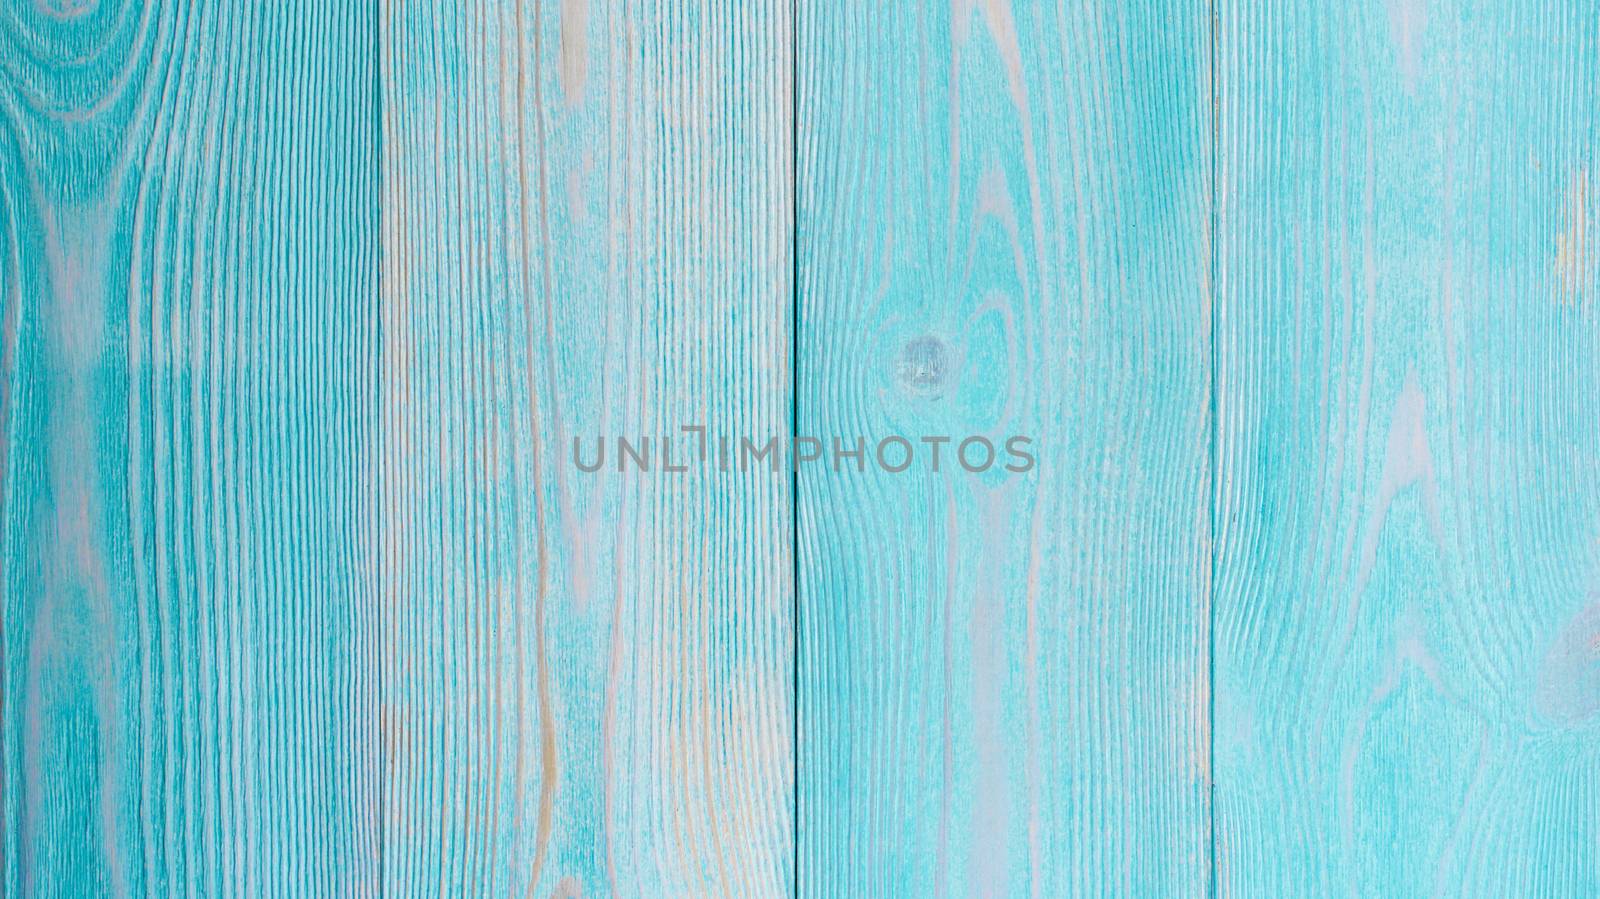 Turquoise Wooden Background by zhekos